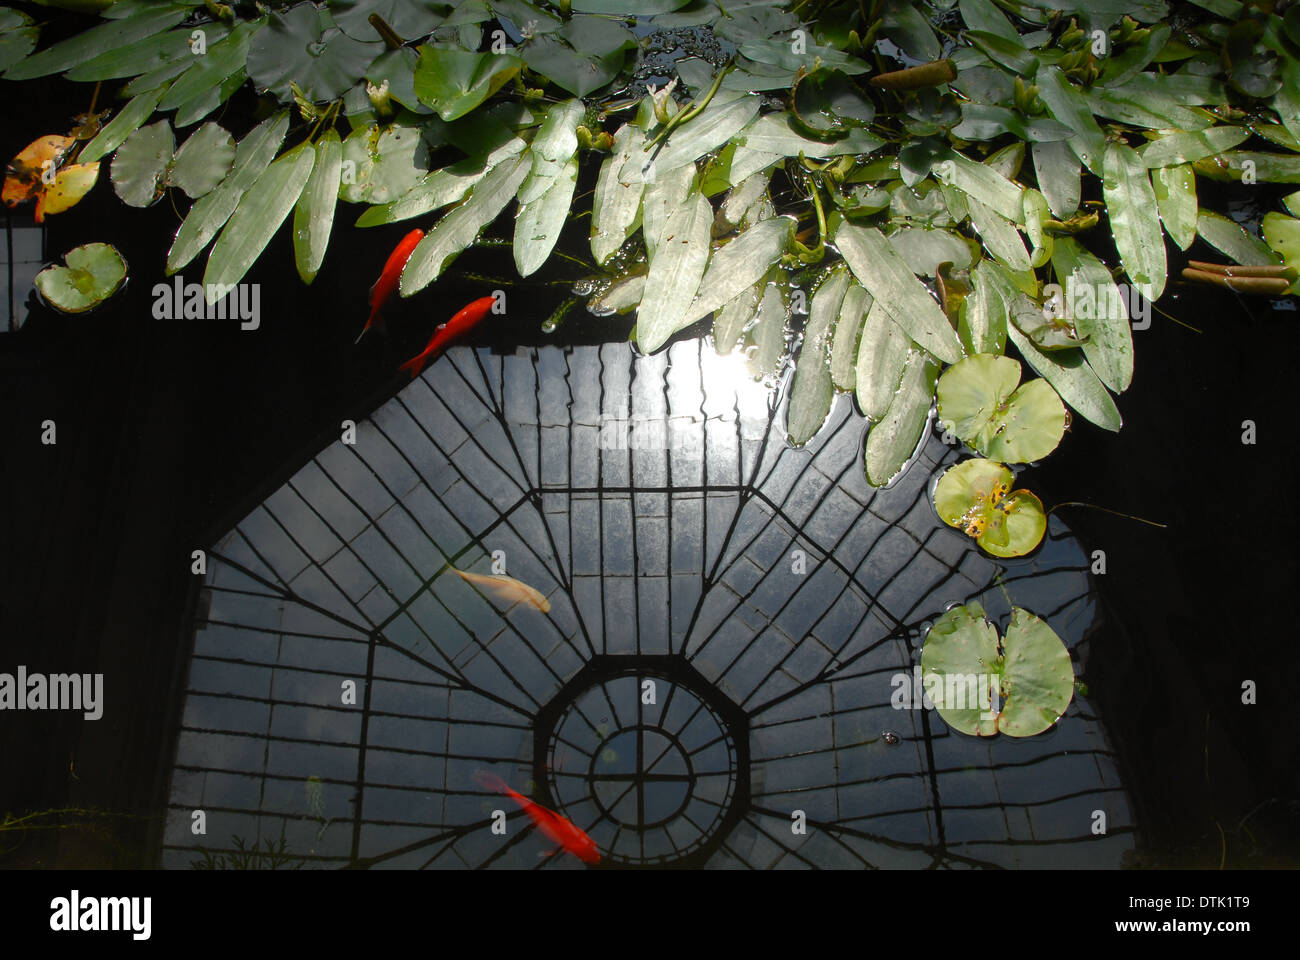 A reflection of the glass ceiling of a conservatory on the surface of a fish pond. Stock Photo